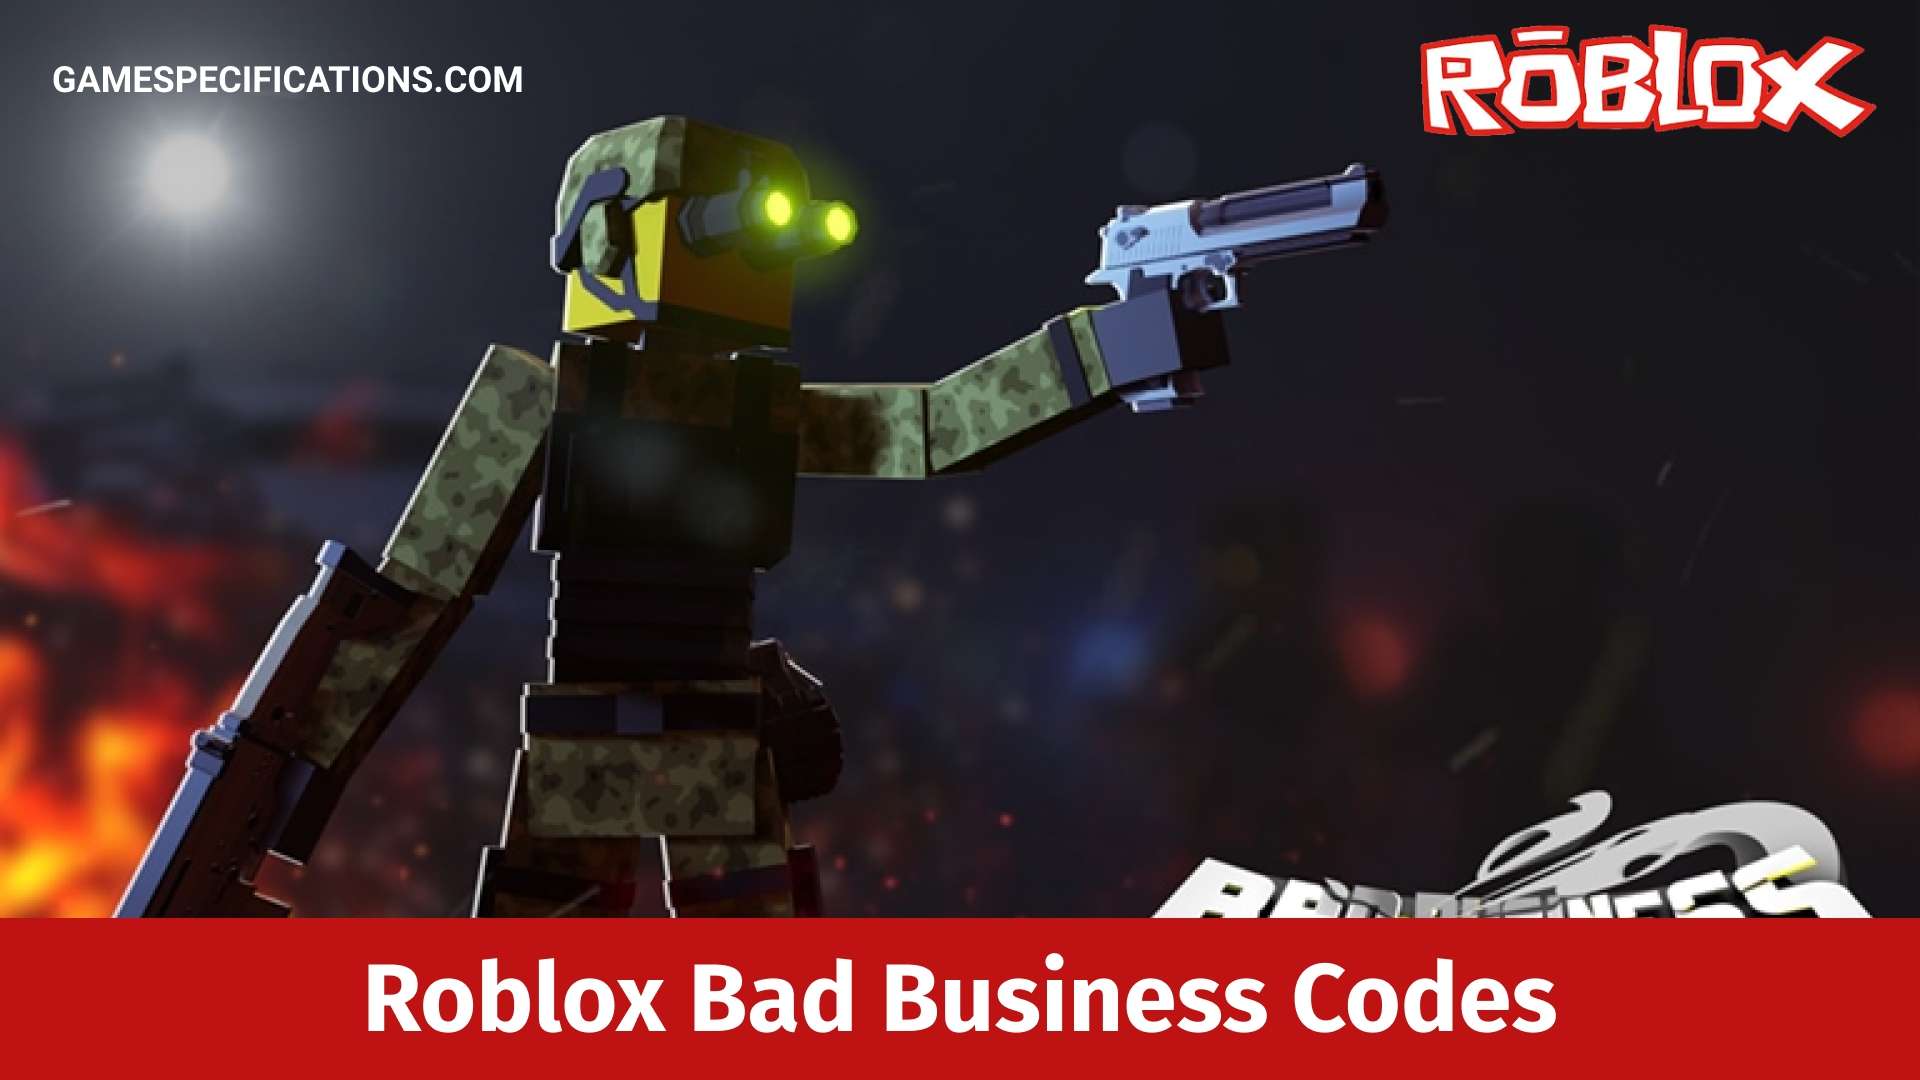 Roblox Bad Business Codes July 2021 Game Specifications - overwatch roblox game